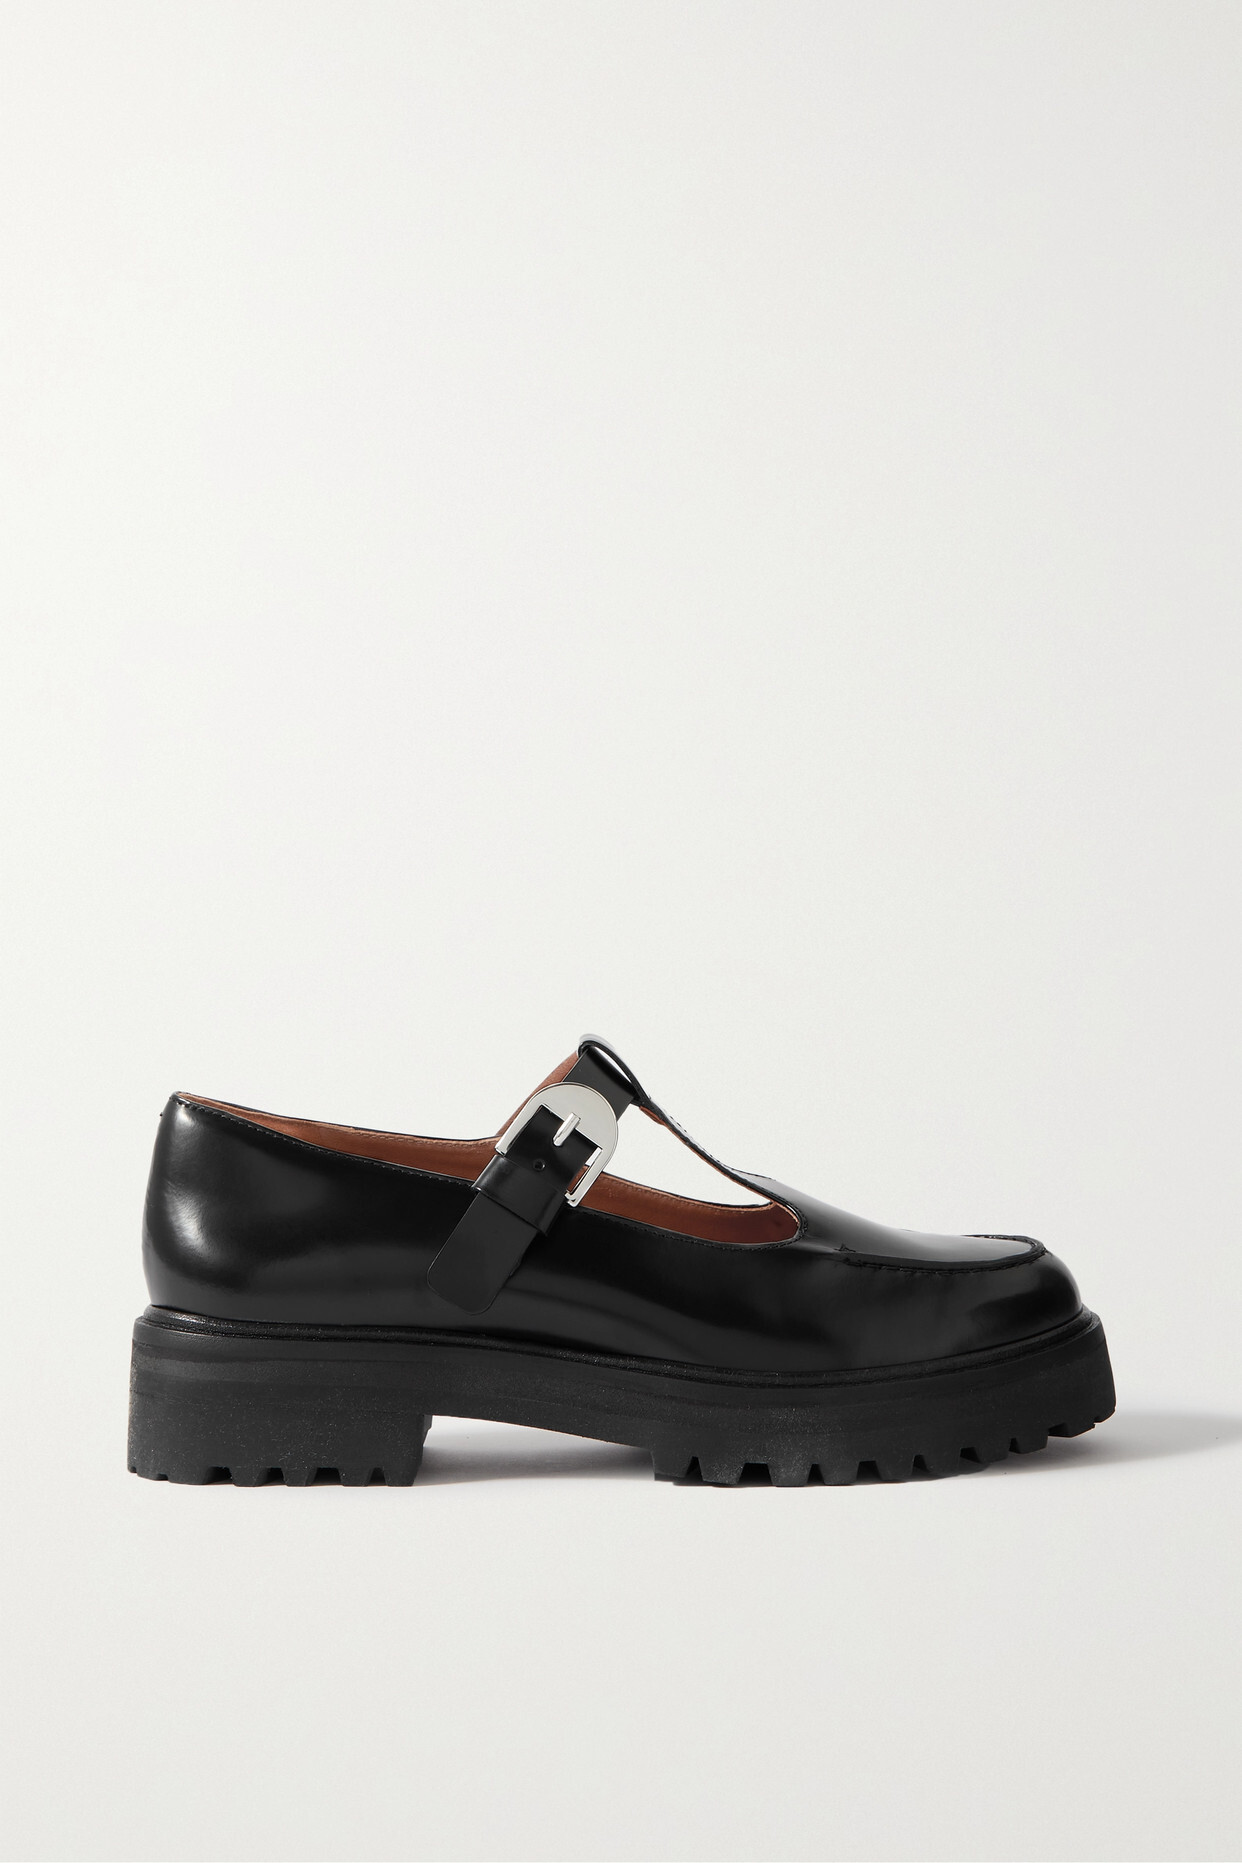 Reformation - Abalonia Leather Mary Jane Pumps - Black